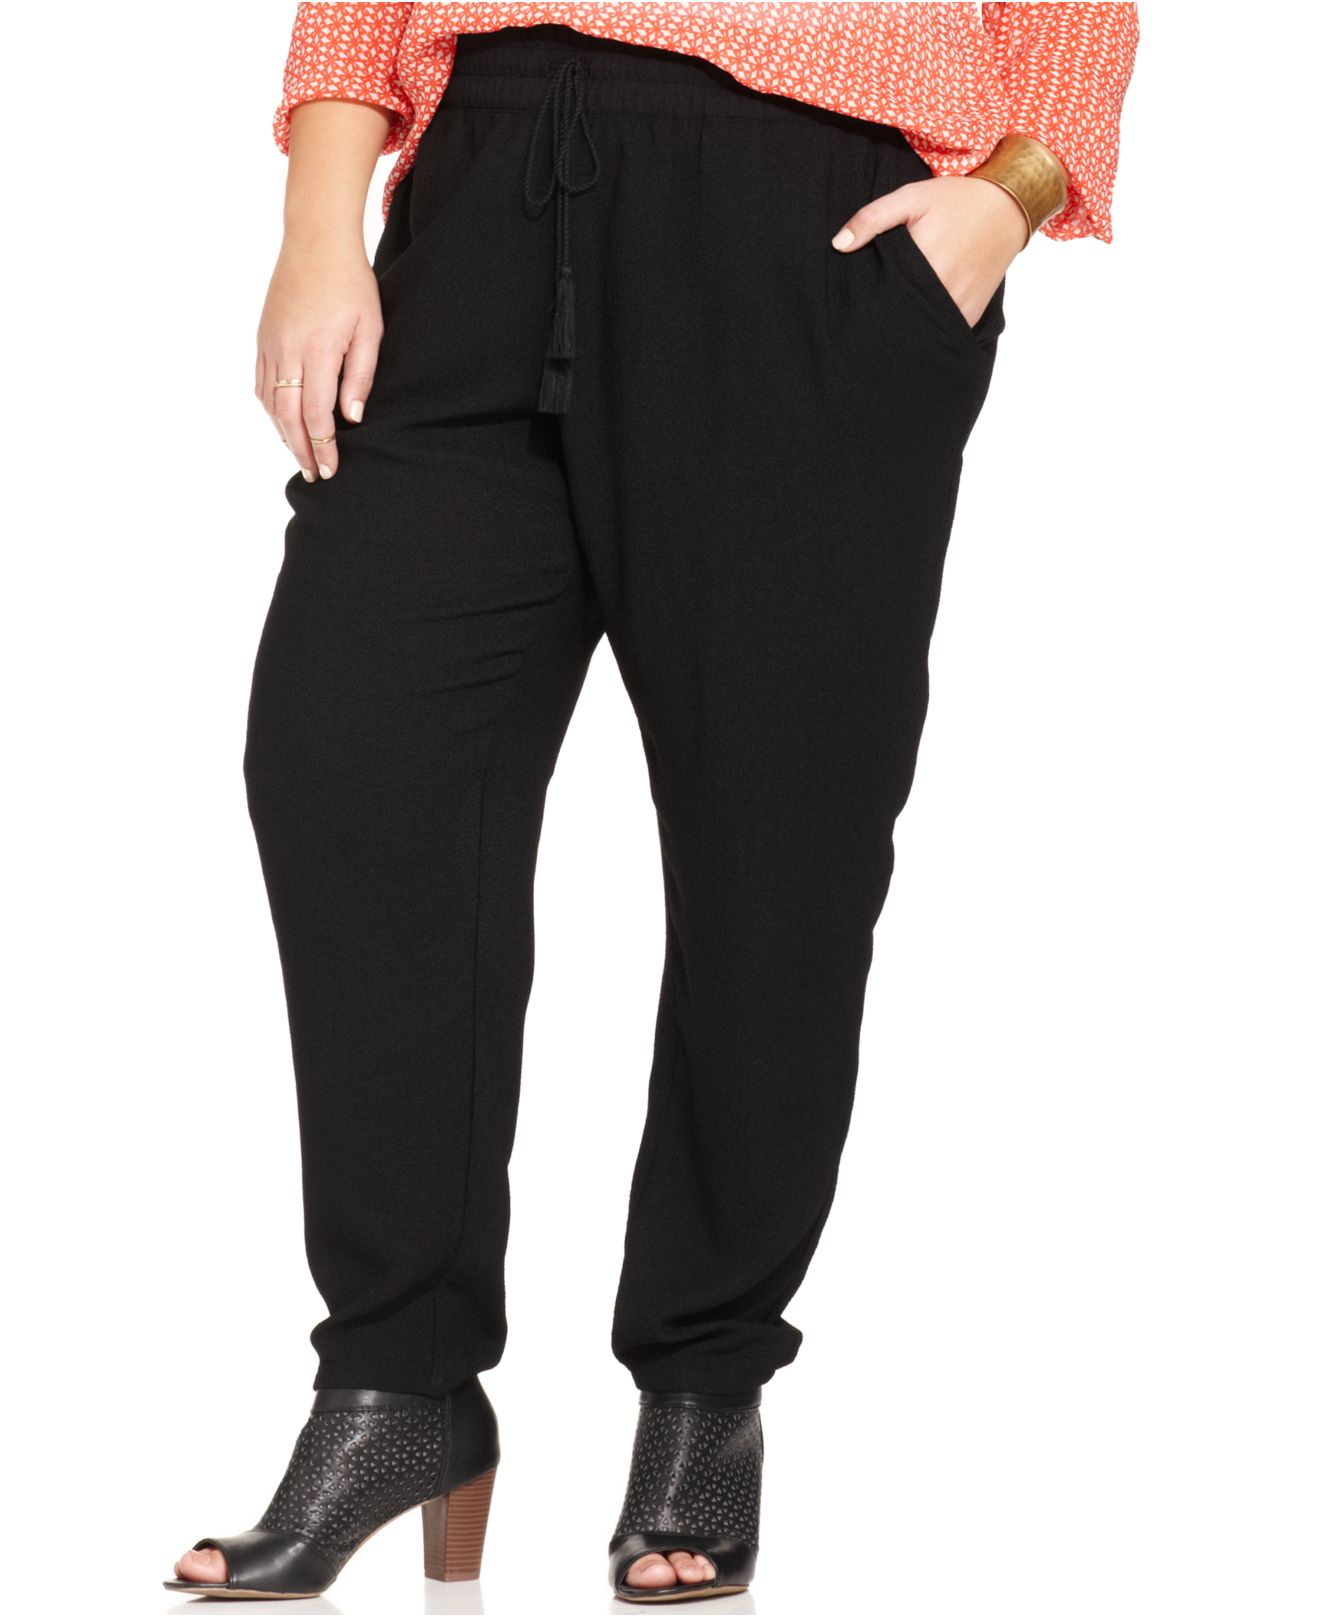 Lyst - Lucky Brand Lucky Brand Plus Size Soft Pants in Black